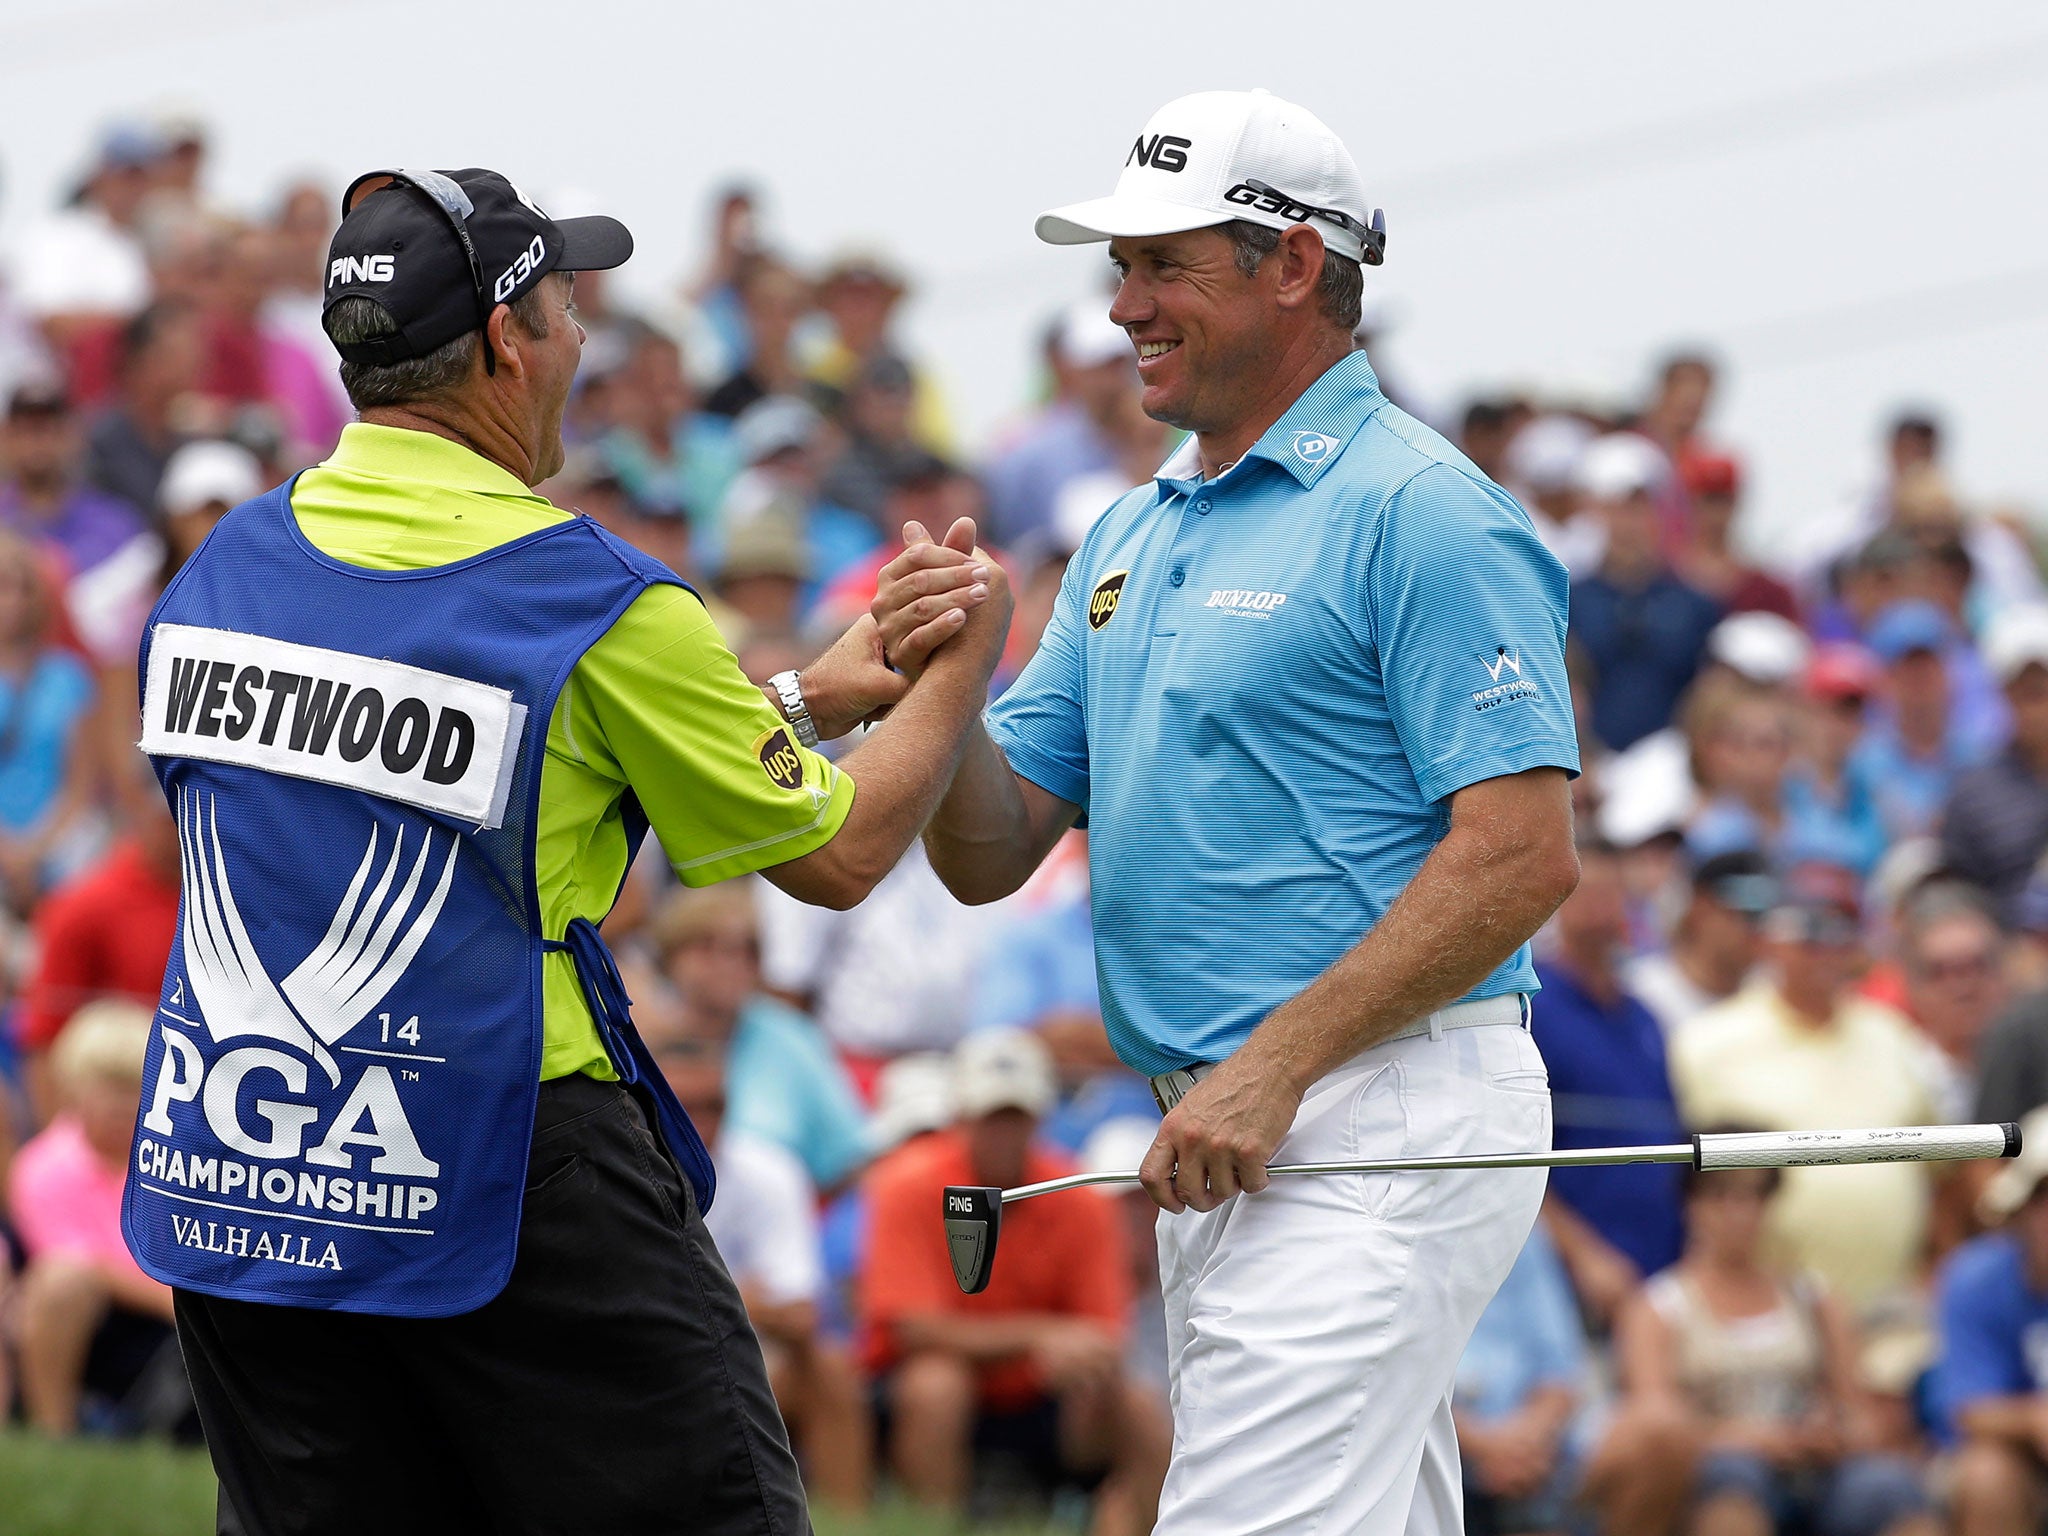 Lee Westwood, right, celebrates completing his round of 65